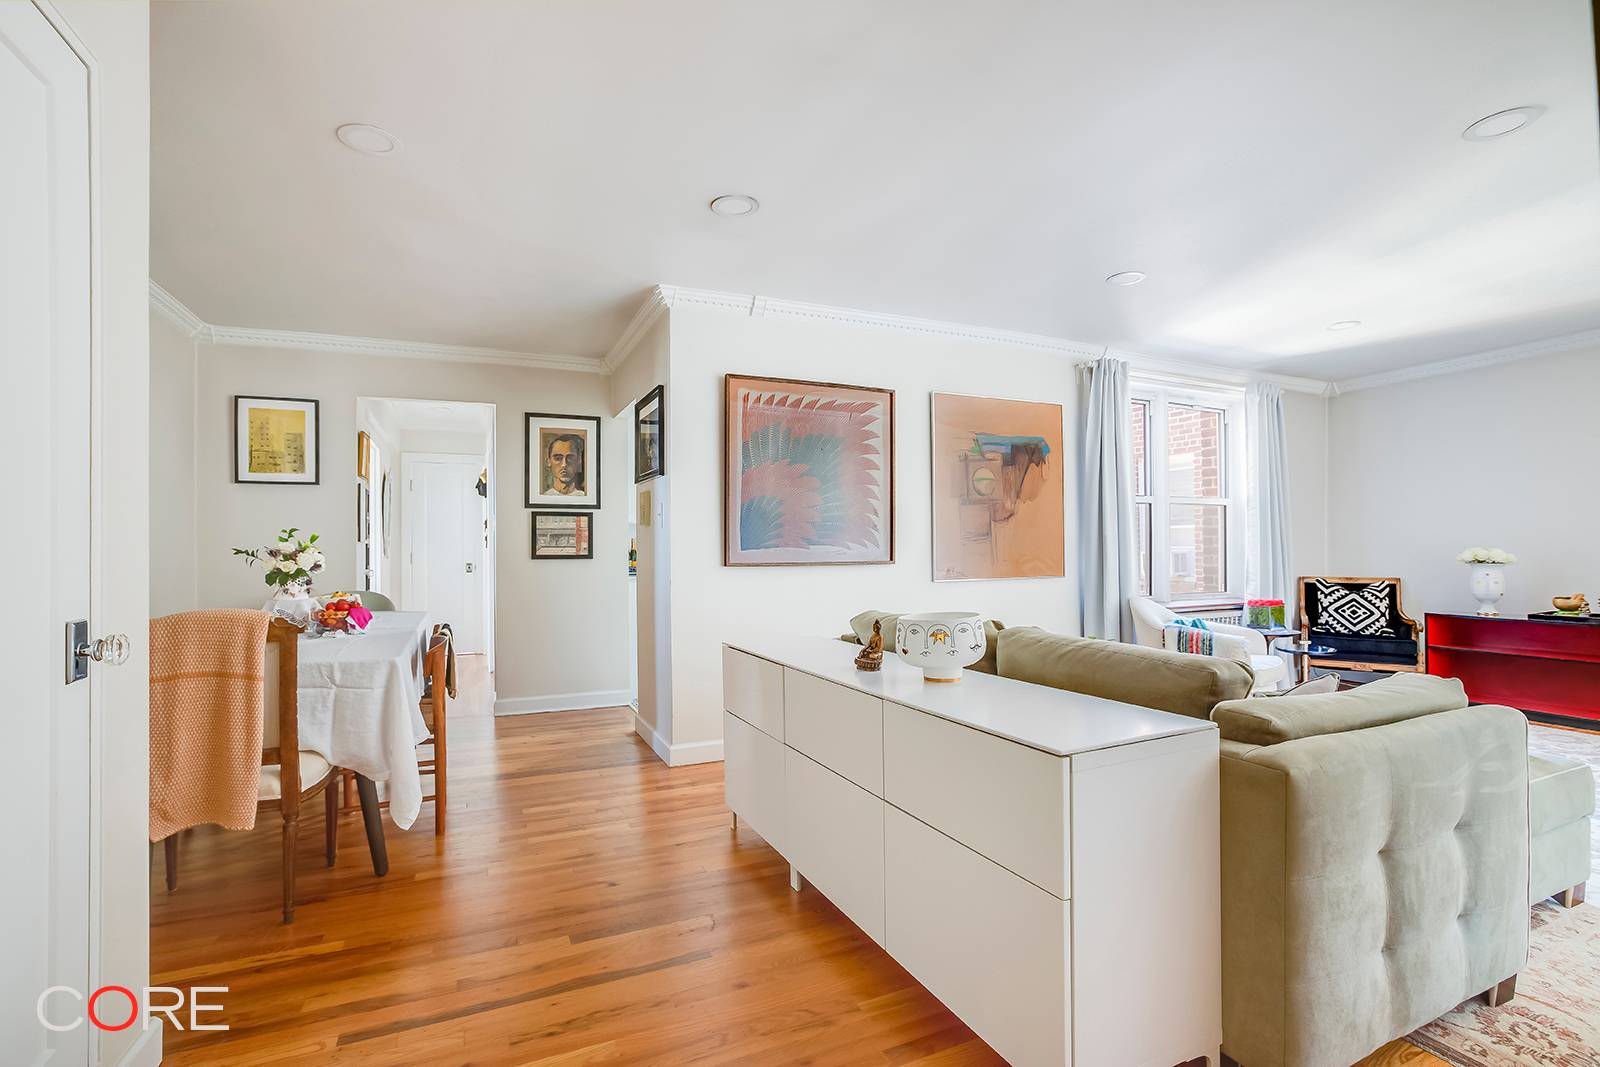 Quiet luxury awaits in this mint condition top floor residence in the heart of Midwood Brooklyn.